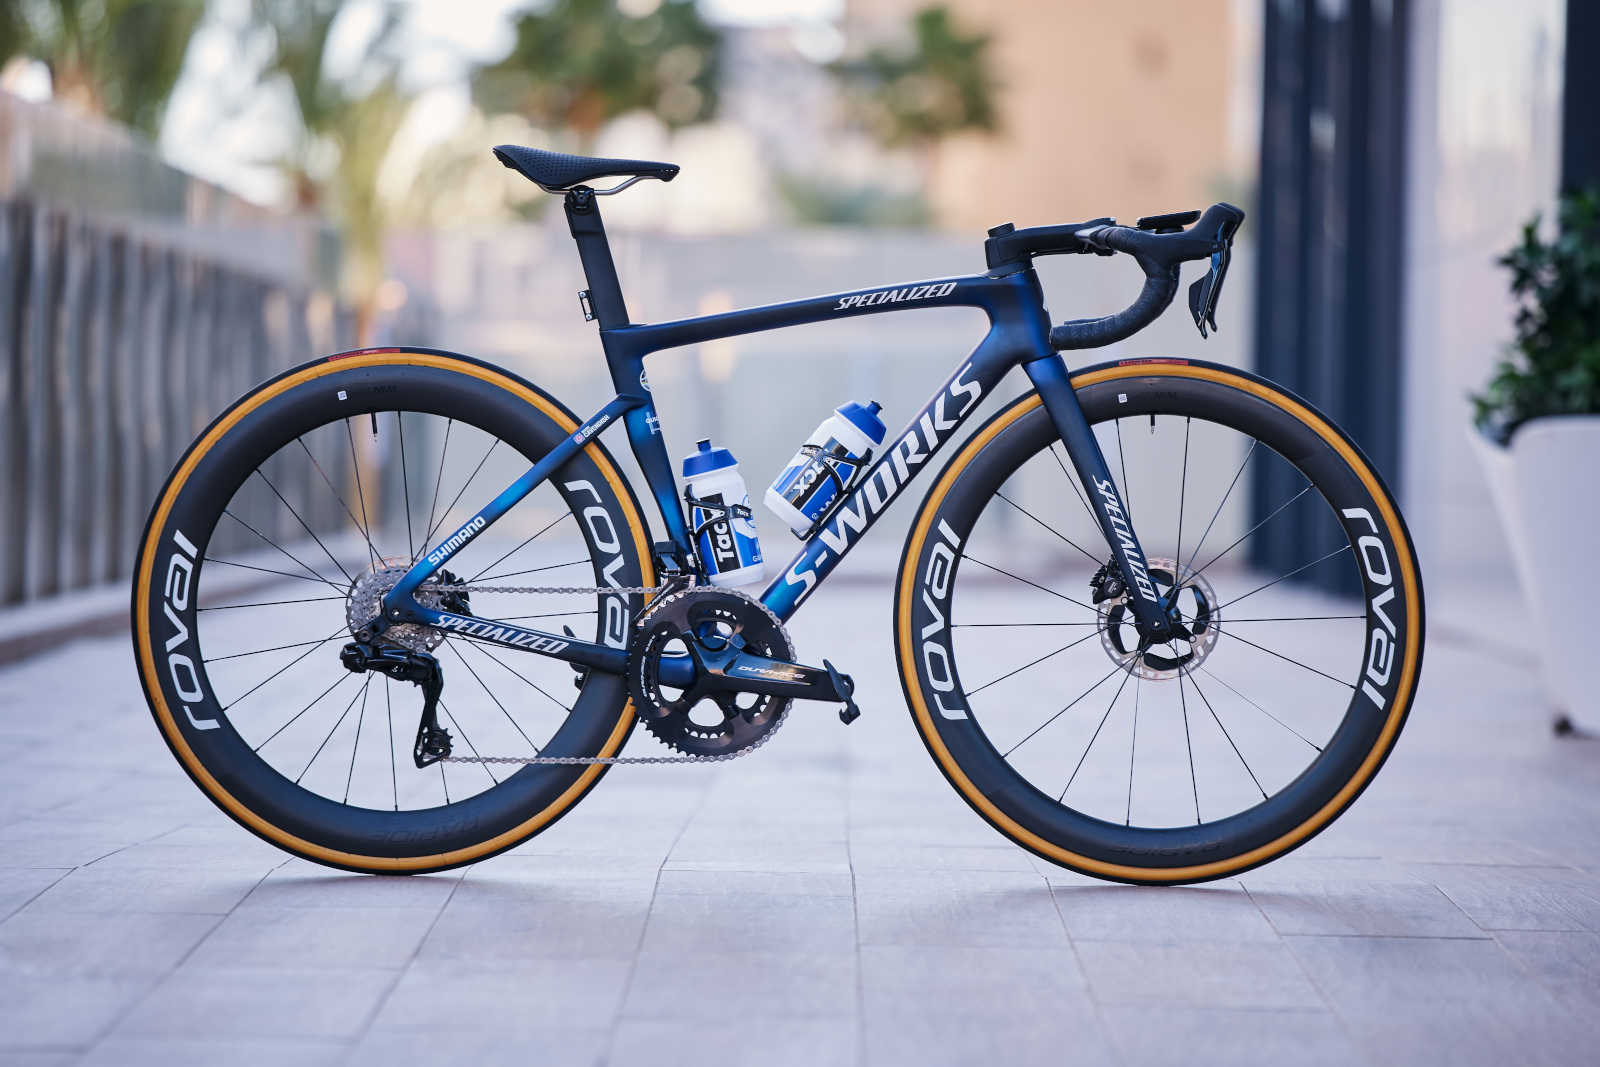 Check out the 2022 Specialized Tarmac SL7 Team colours Canadian